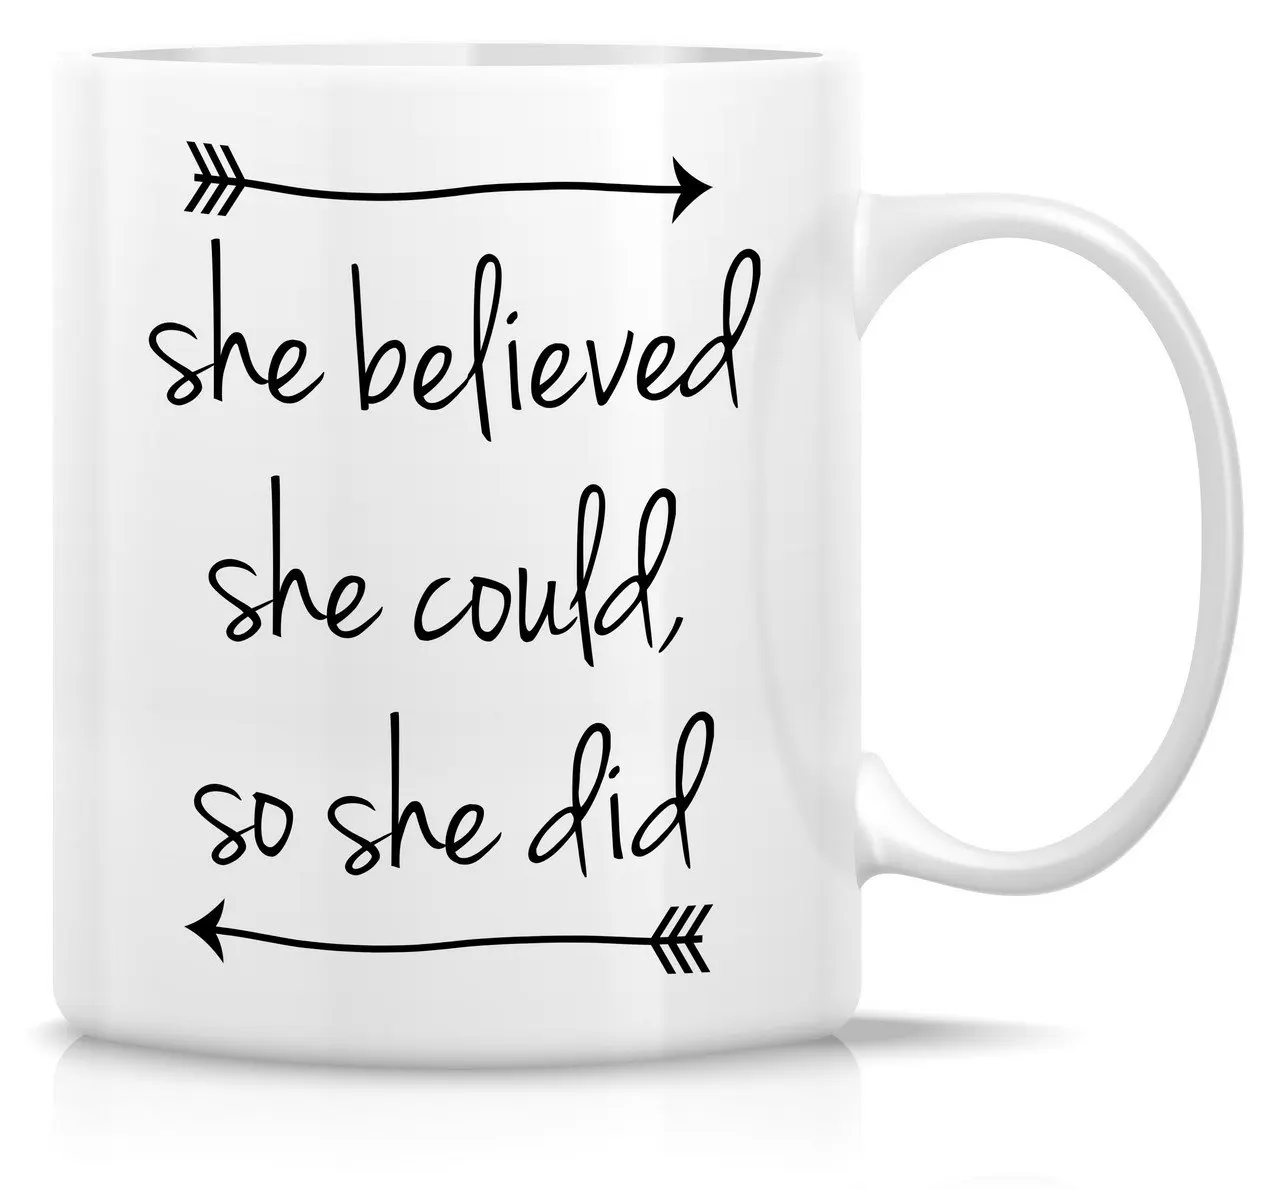 

Funny Mug - She Believed She Could She Did 11 Oz Ceramic Coffee Mugs - Funny, Motivational, Inspirational birthday gifts